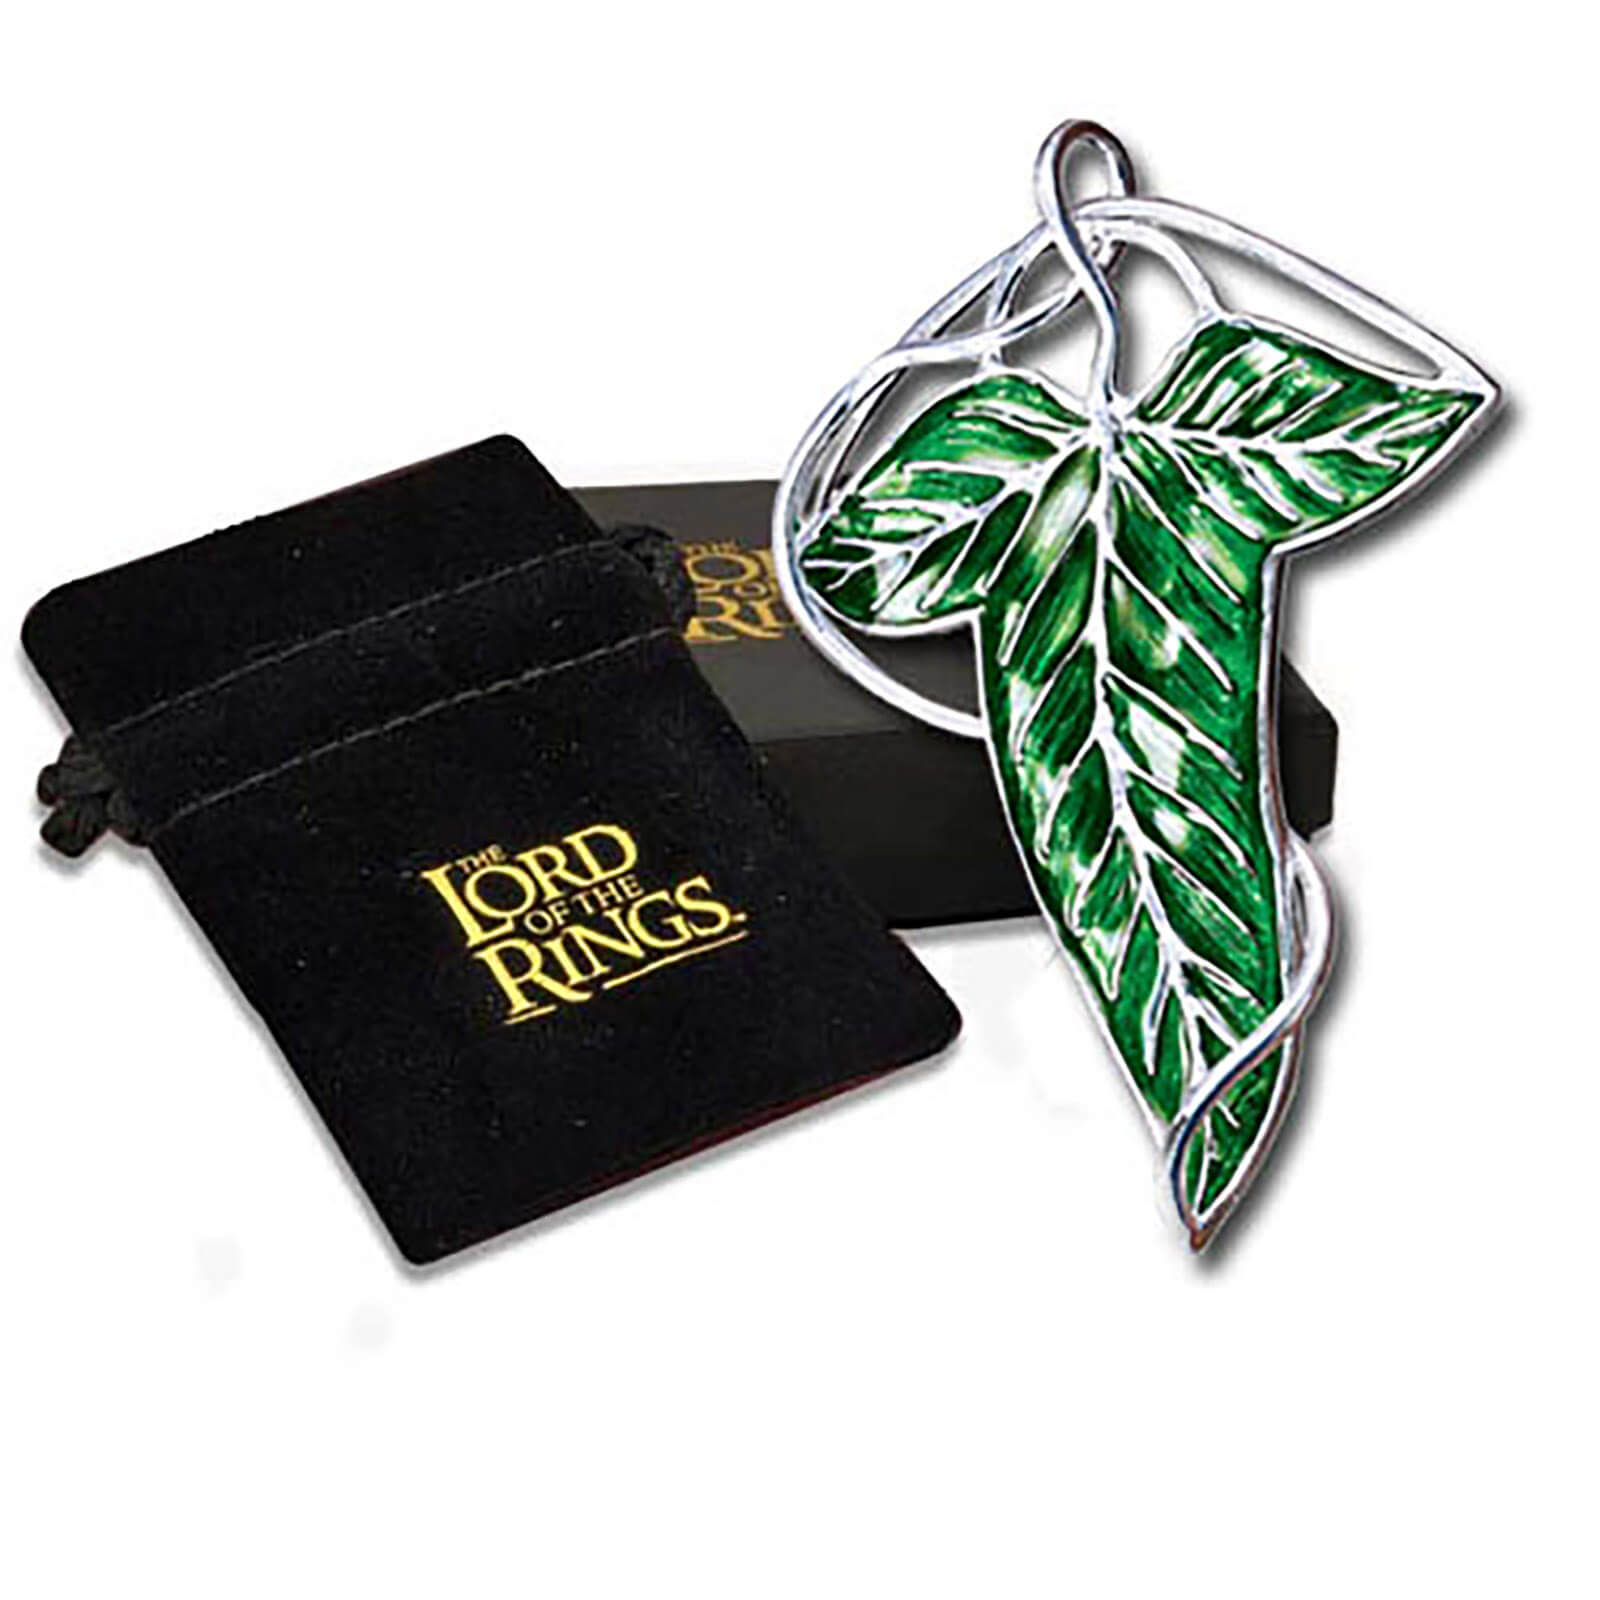 Lord of the Rings Elven Brooch Costume Replica